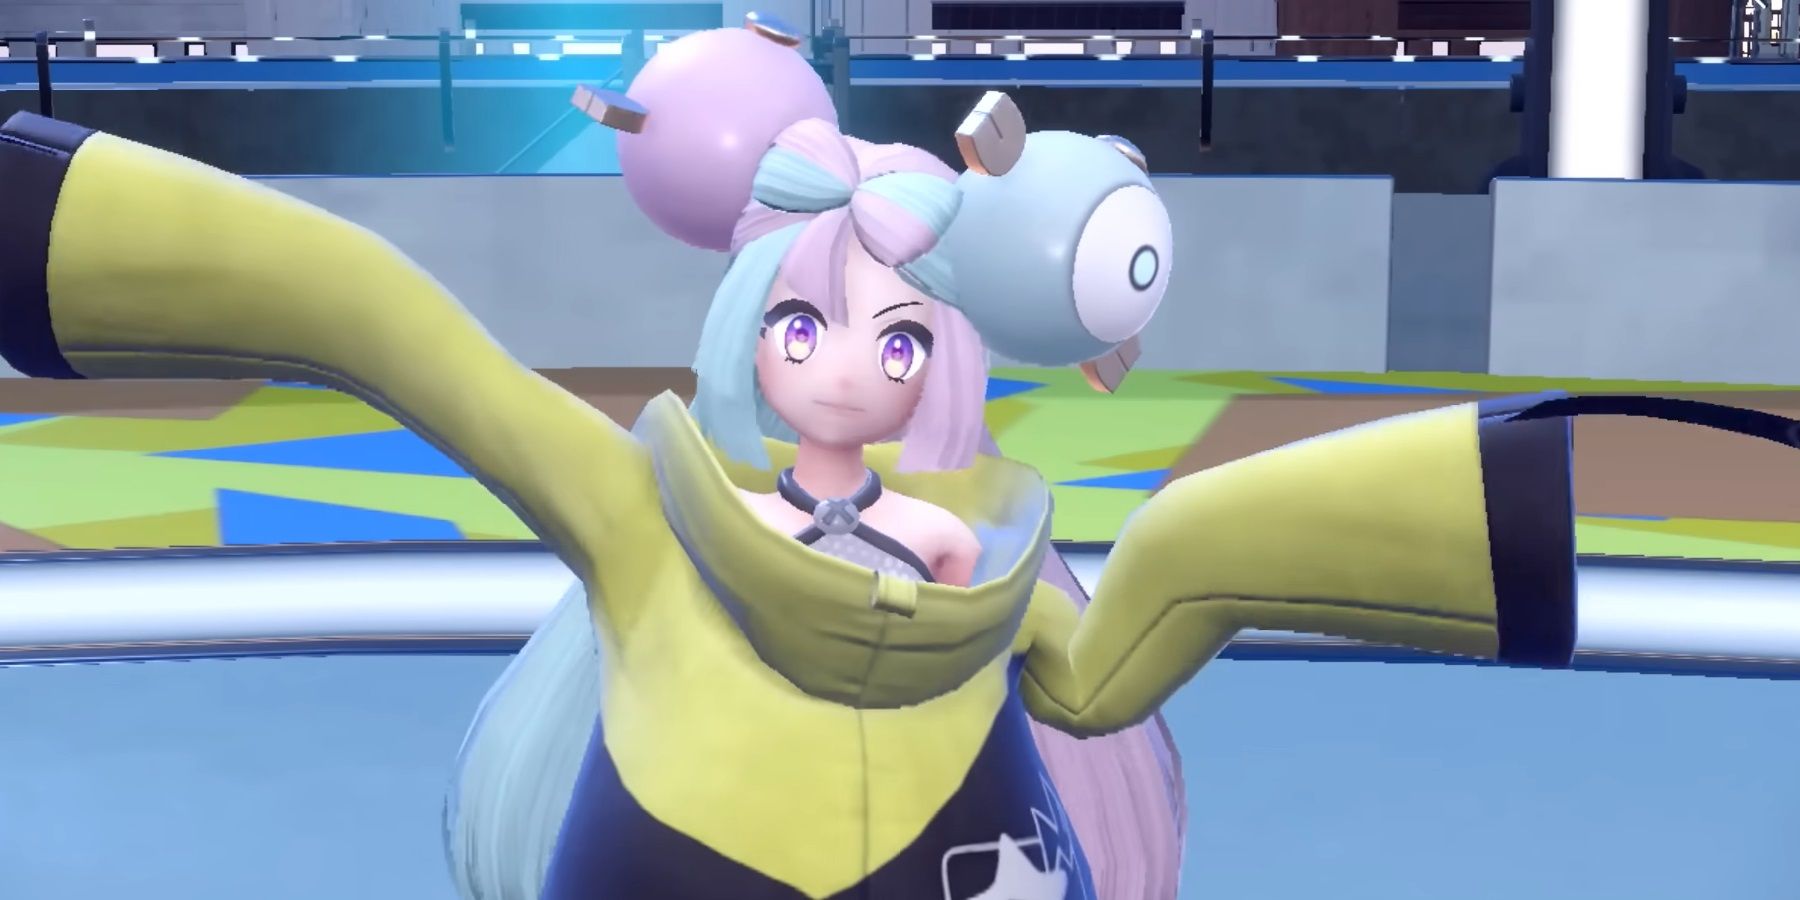 Pokemon Scarlet and Violet Early Impressions Show
Performance Struggles